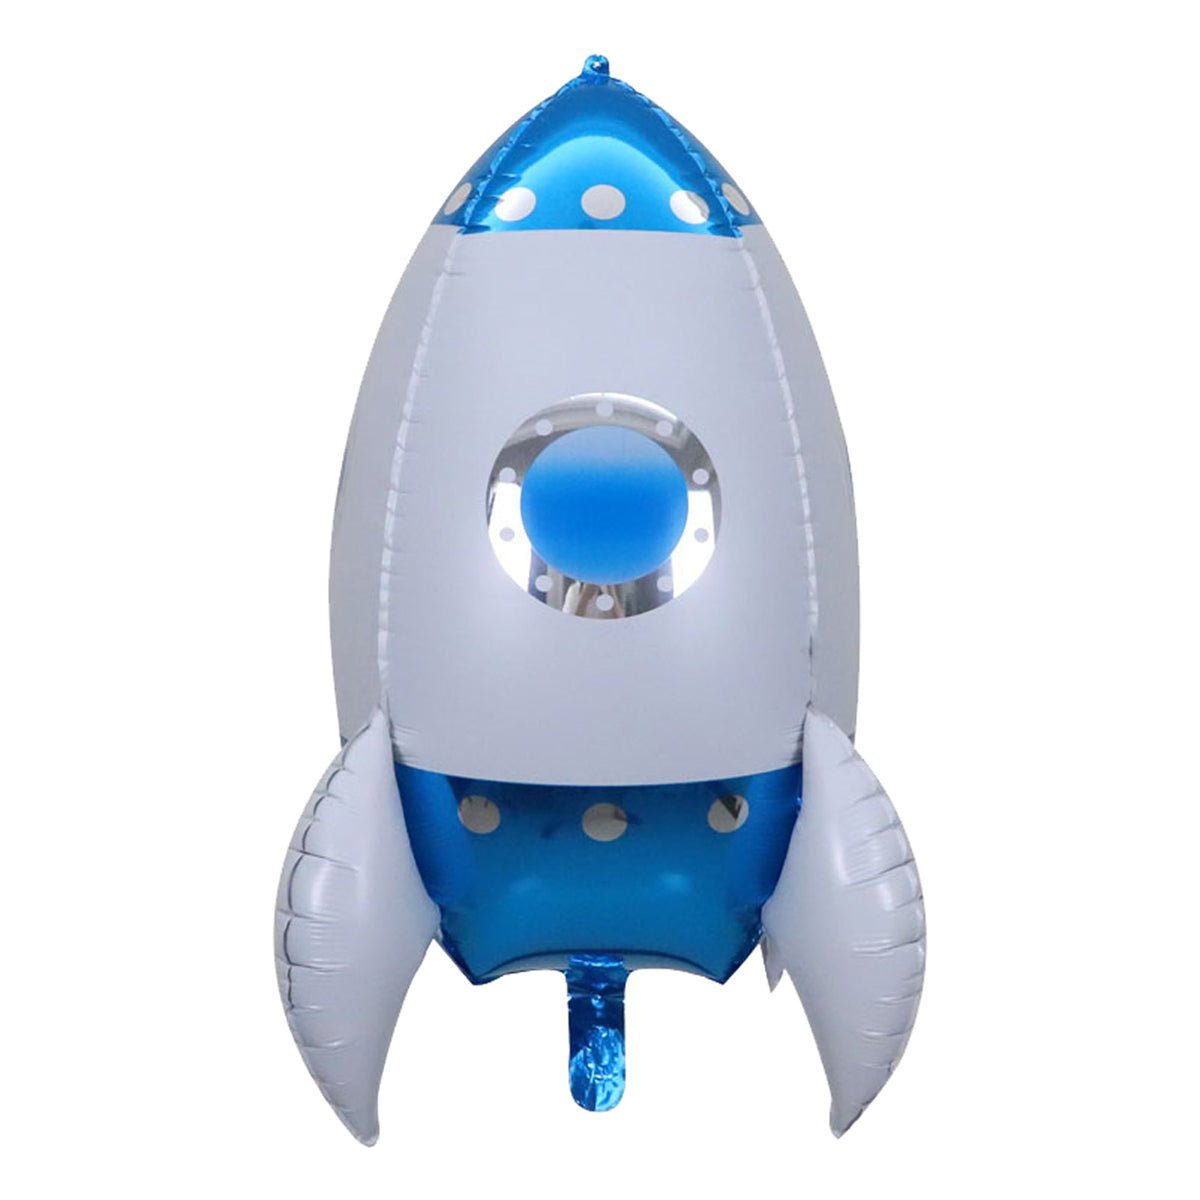 LE GROUPE BLC INTL INC Balloons Rocket Supershape Balloon, 24 Inches, 1 Count